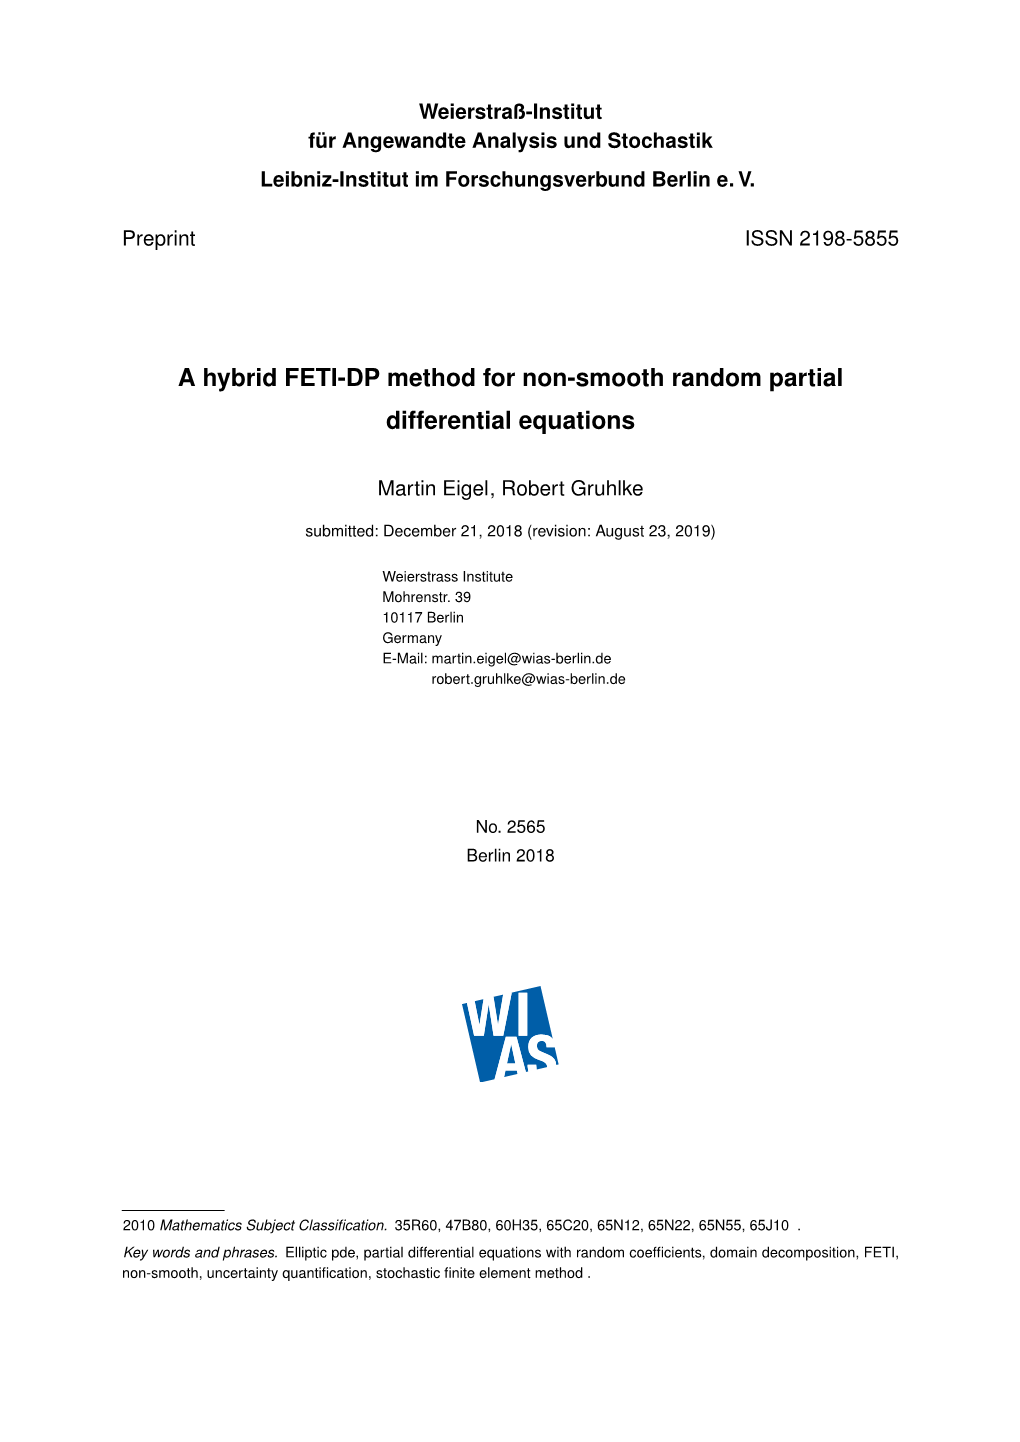 A Hybrid FETI-DP Method for Non-Smooth Random Partial Differential Equations